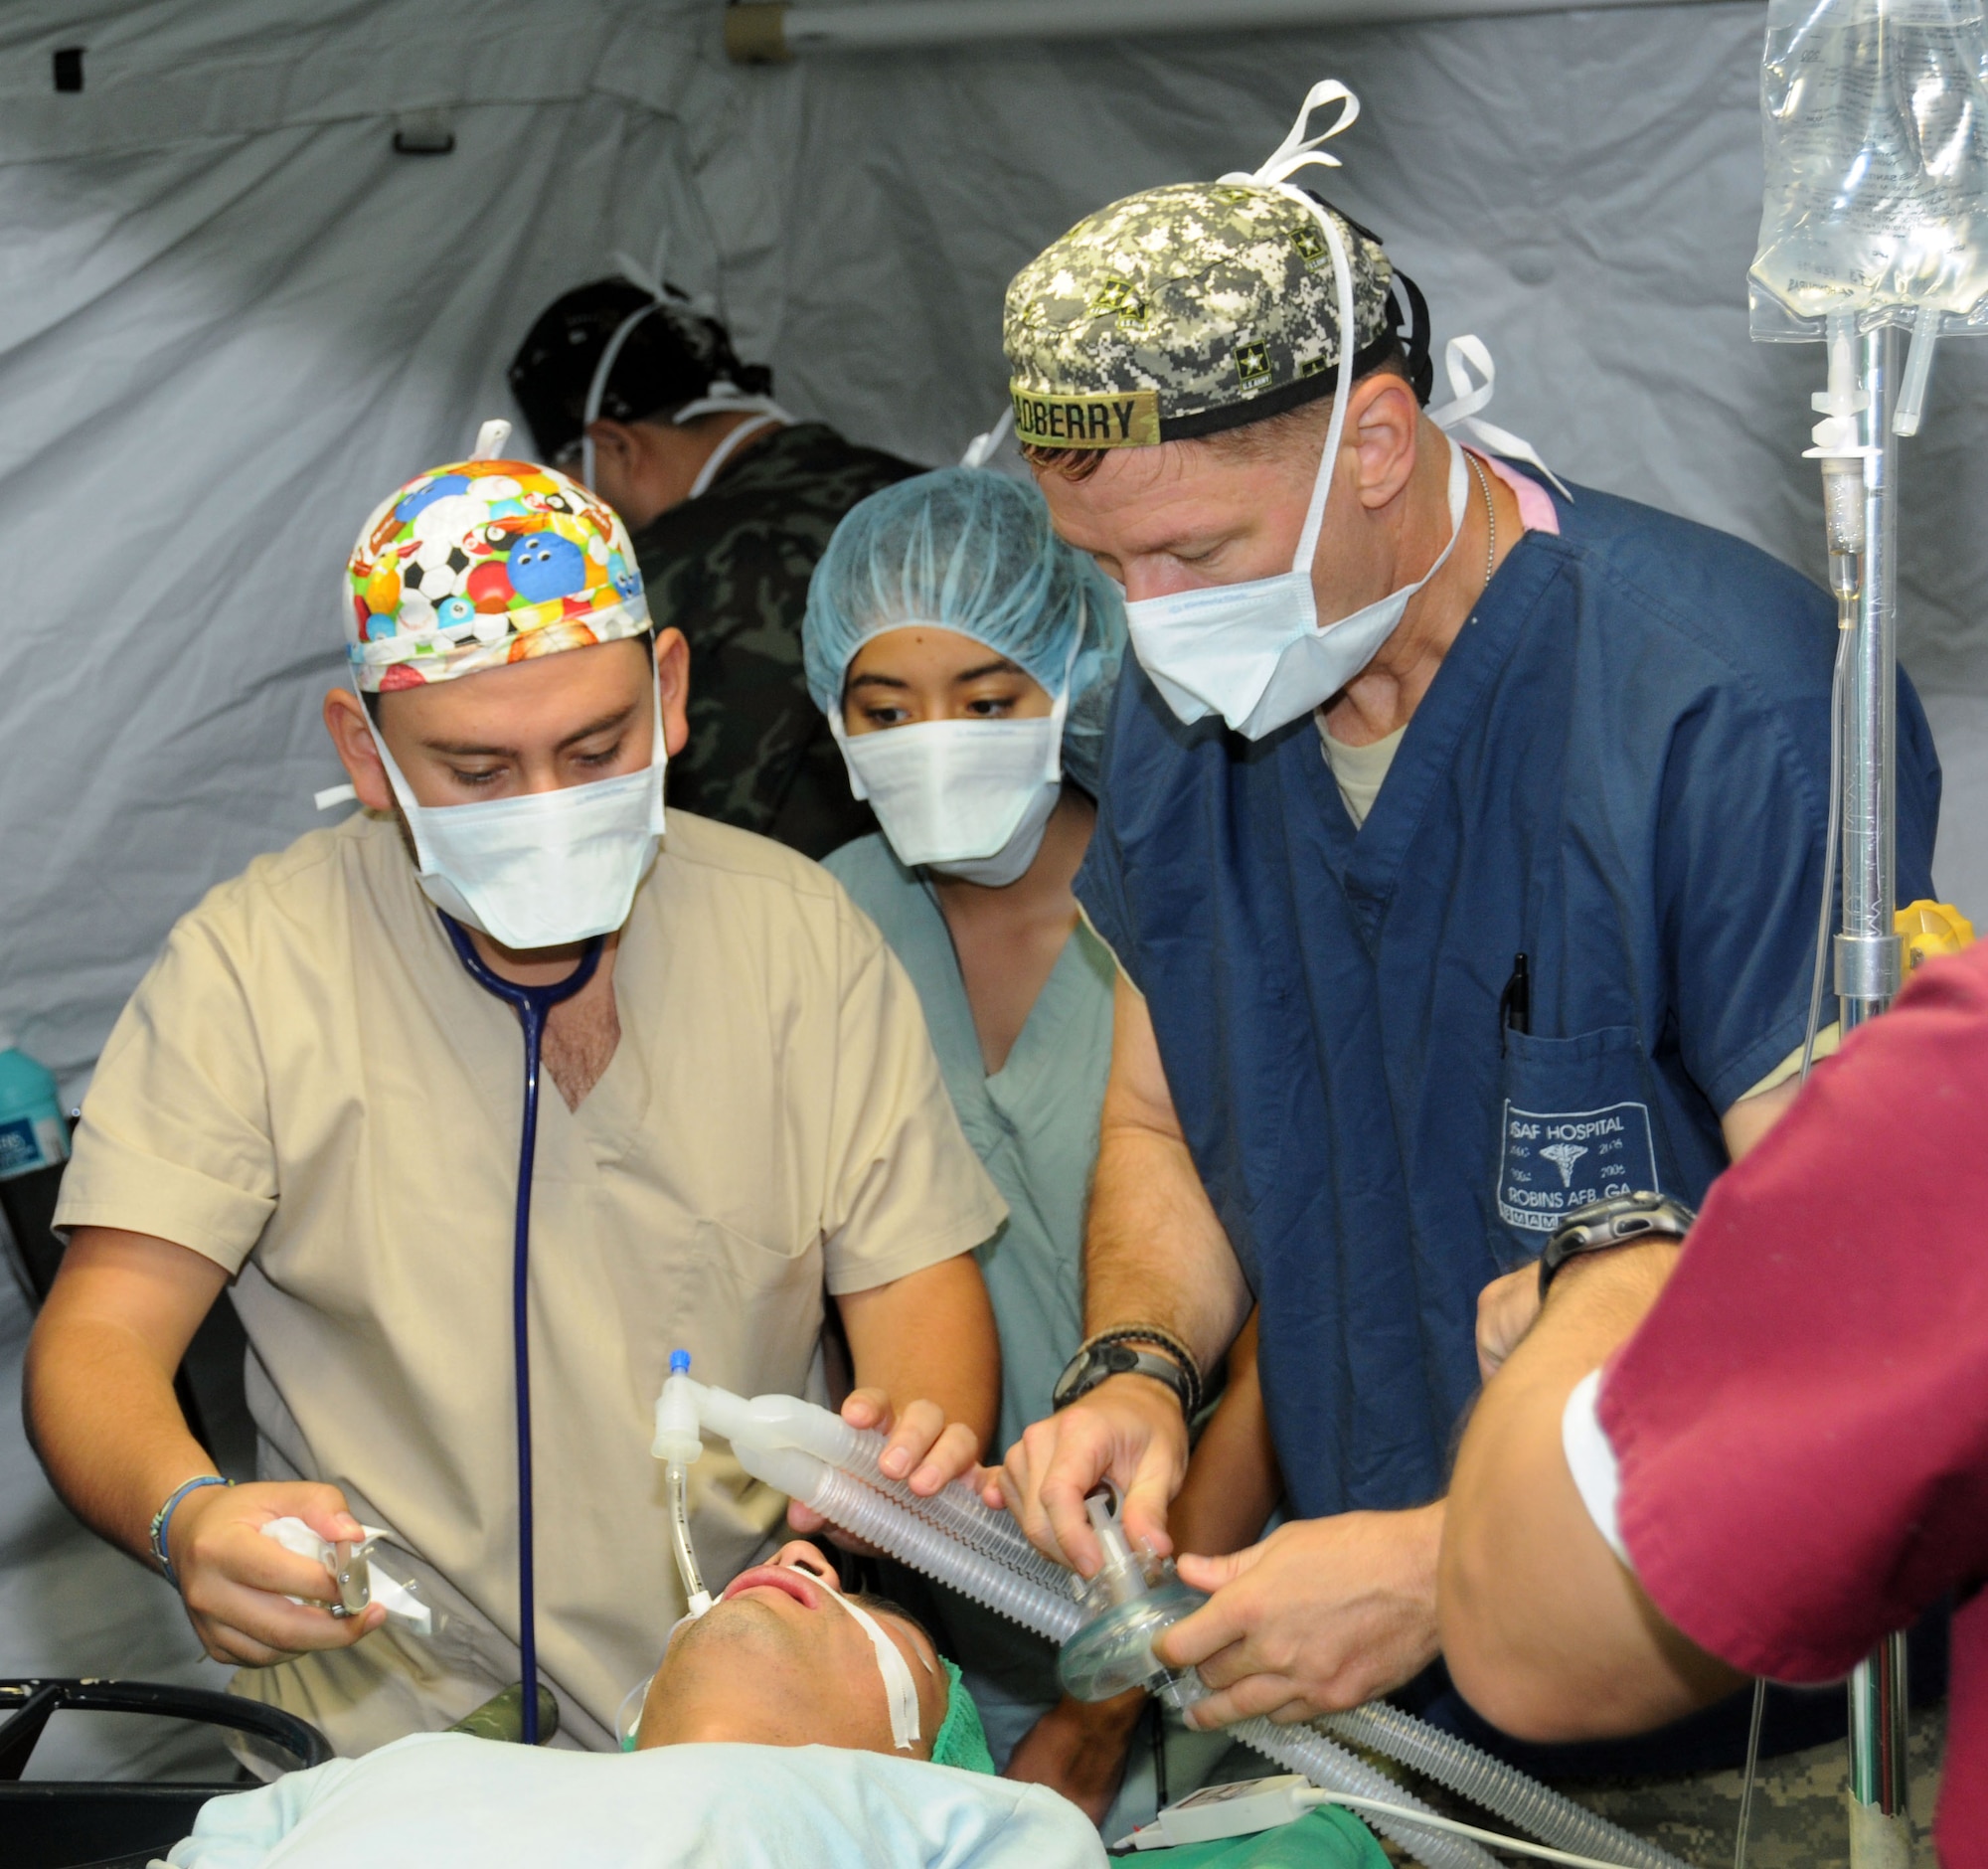 U. S. Army Maj. Scott Gadberry and a Honduran surgical staff member administers anesthetics to a Honduran man before his gall bladder surgery May 7.  His case is one of eight surgeries performed by the Joint Task Force-Bravo's Mobile Surgical Team and the surgical staff of the Santa Rosa hospital in the city of Santa Rosa de Copan, Department of Copan, Honduras during a Medical Readiness Training Exercise May 5-9.  These surgeries, which are often very expensive for Honduran nationals, were provided free of charge.  The work of the MST helped support Honduran medical capabilities while continuing to strengthen the relationship between JTF-Bravo and its partner nation.  (Photo by U. S. Air National Guard Capt. Steven Stubbs)